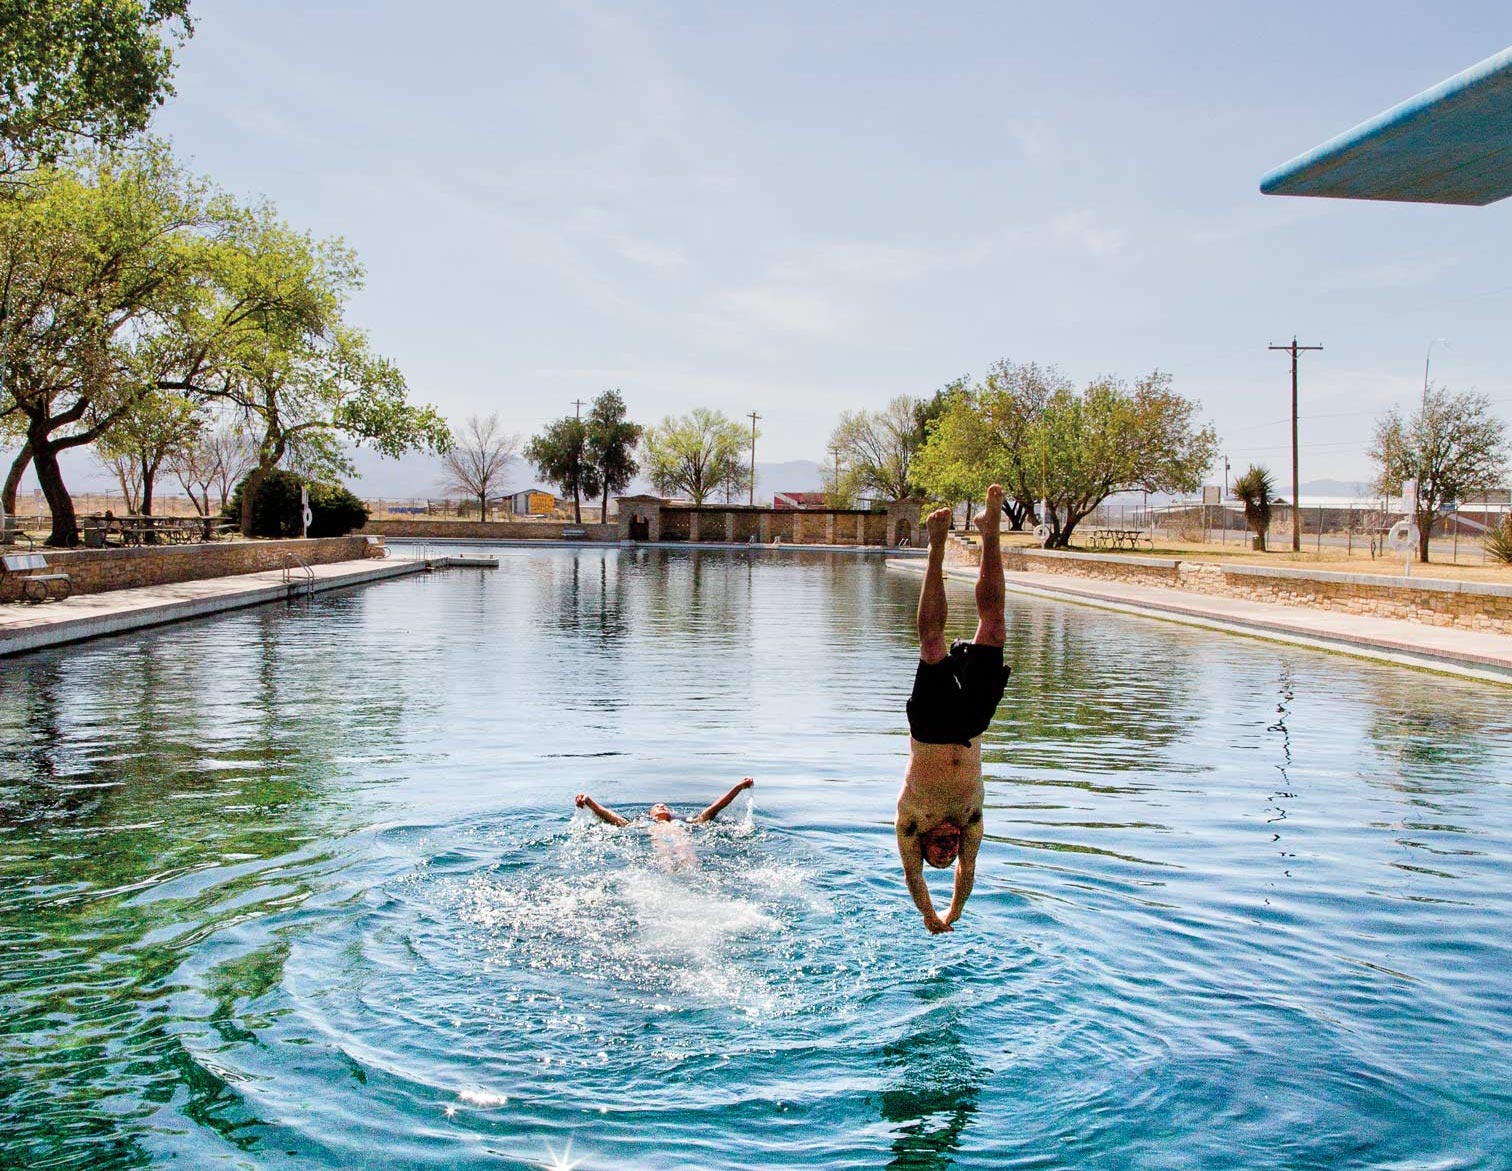 Diving into the pool at Balmorhea State Park